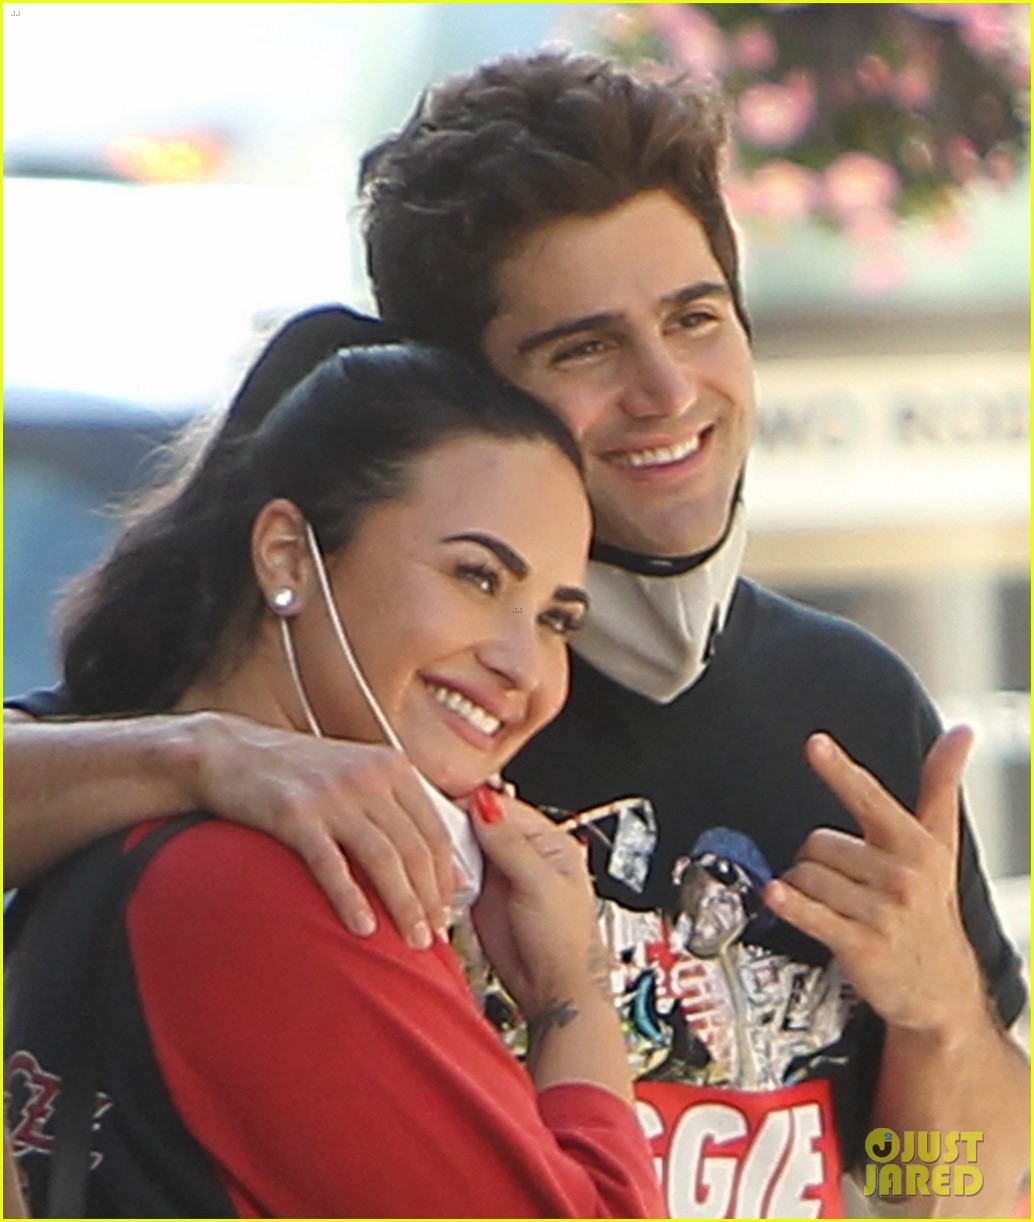 demi lovato max ehrich pack on pda show ring 07